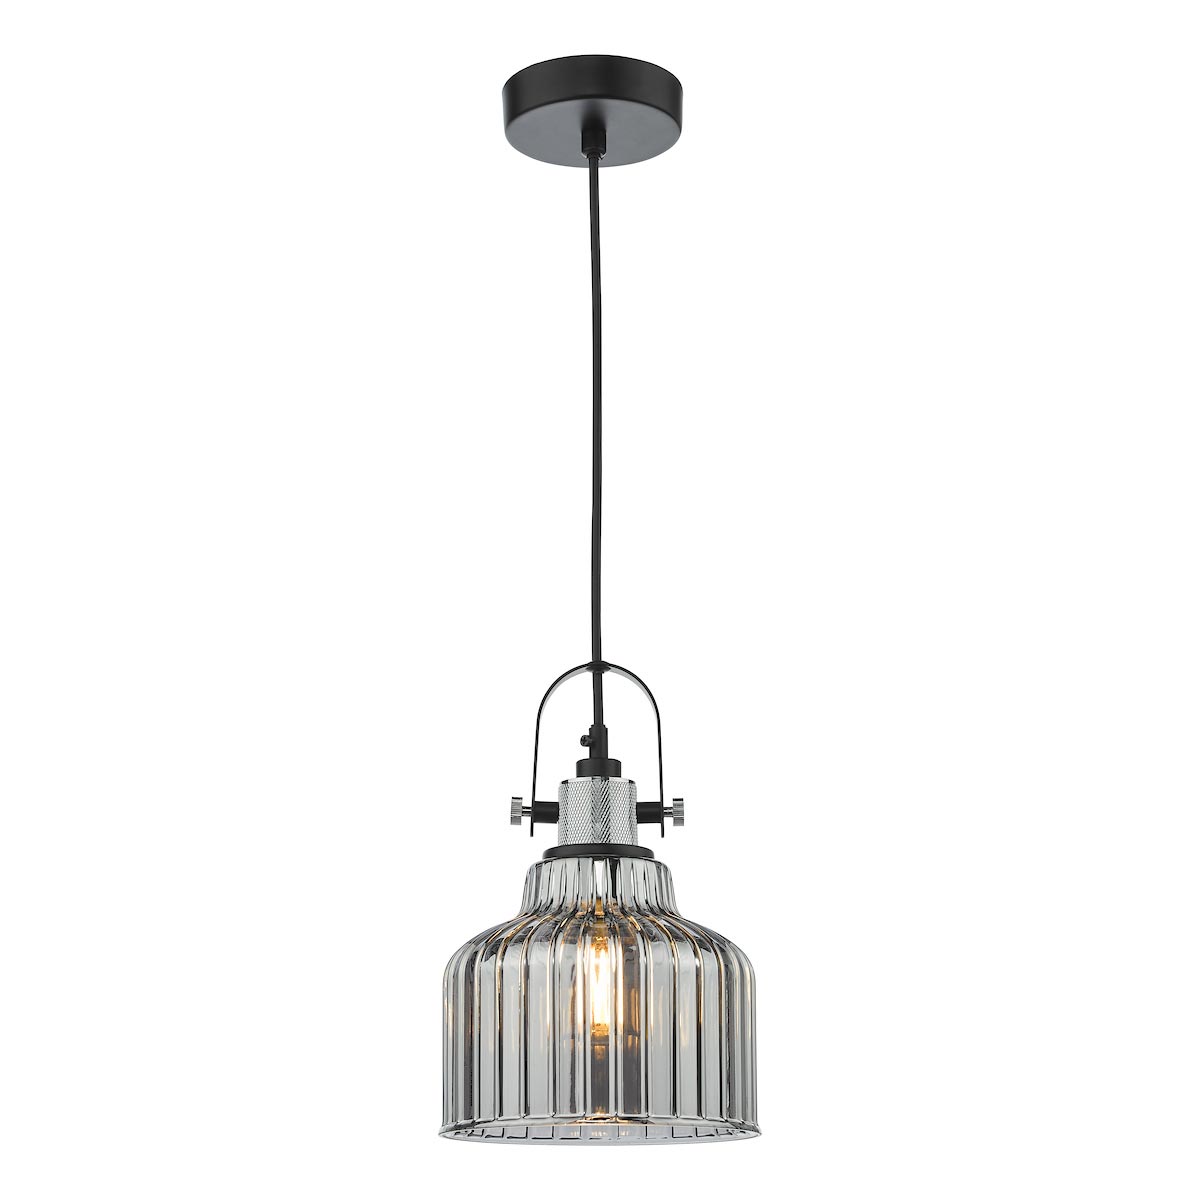 Dar Rhode Chrome Industrial 1 Light Small Ceiling Pendant Smoked Glass